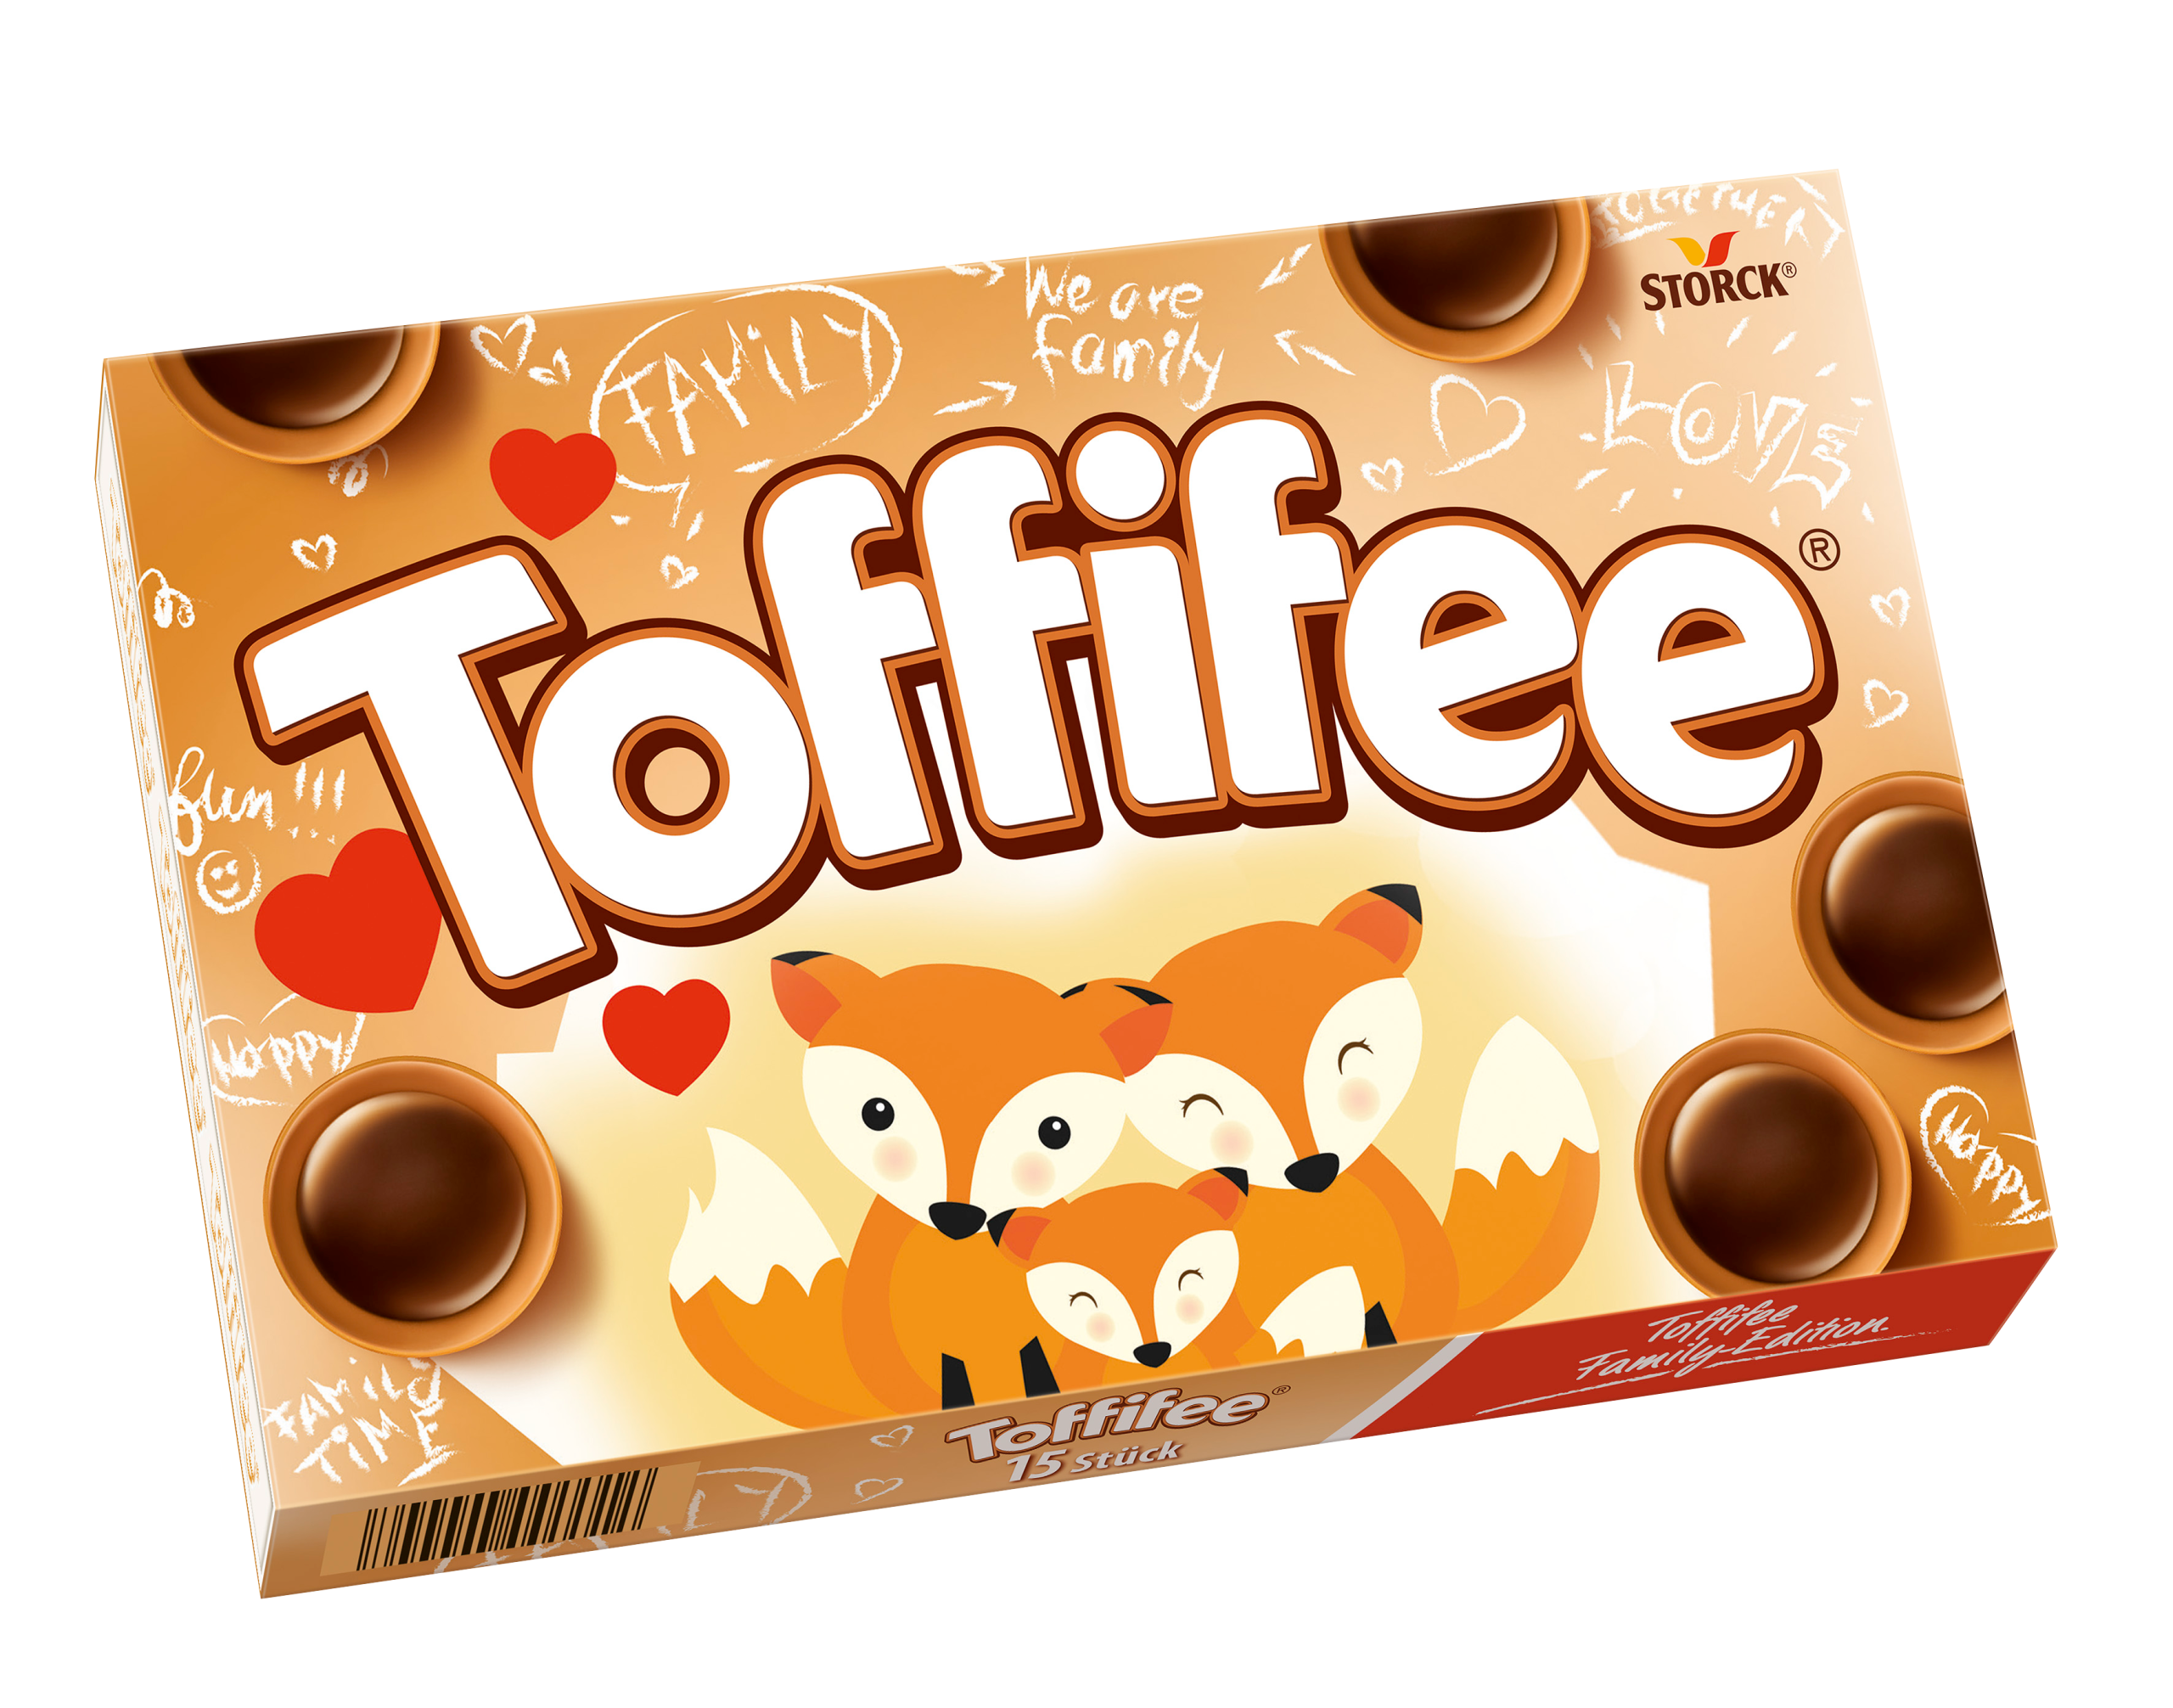 Toffifee launches limited-edition family focused pack design for summer